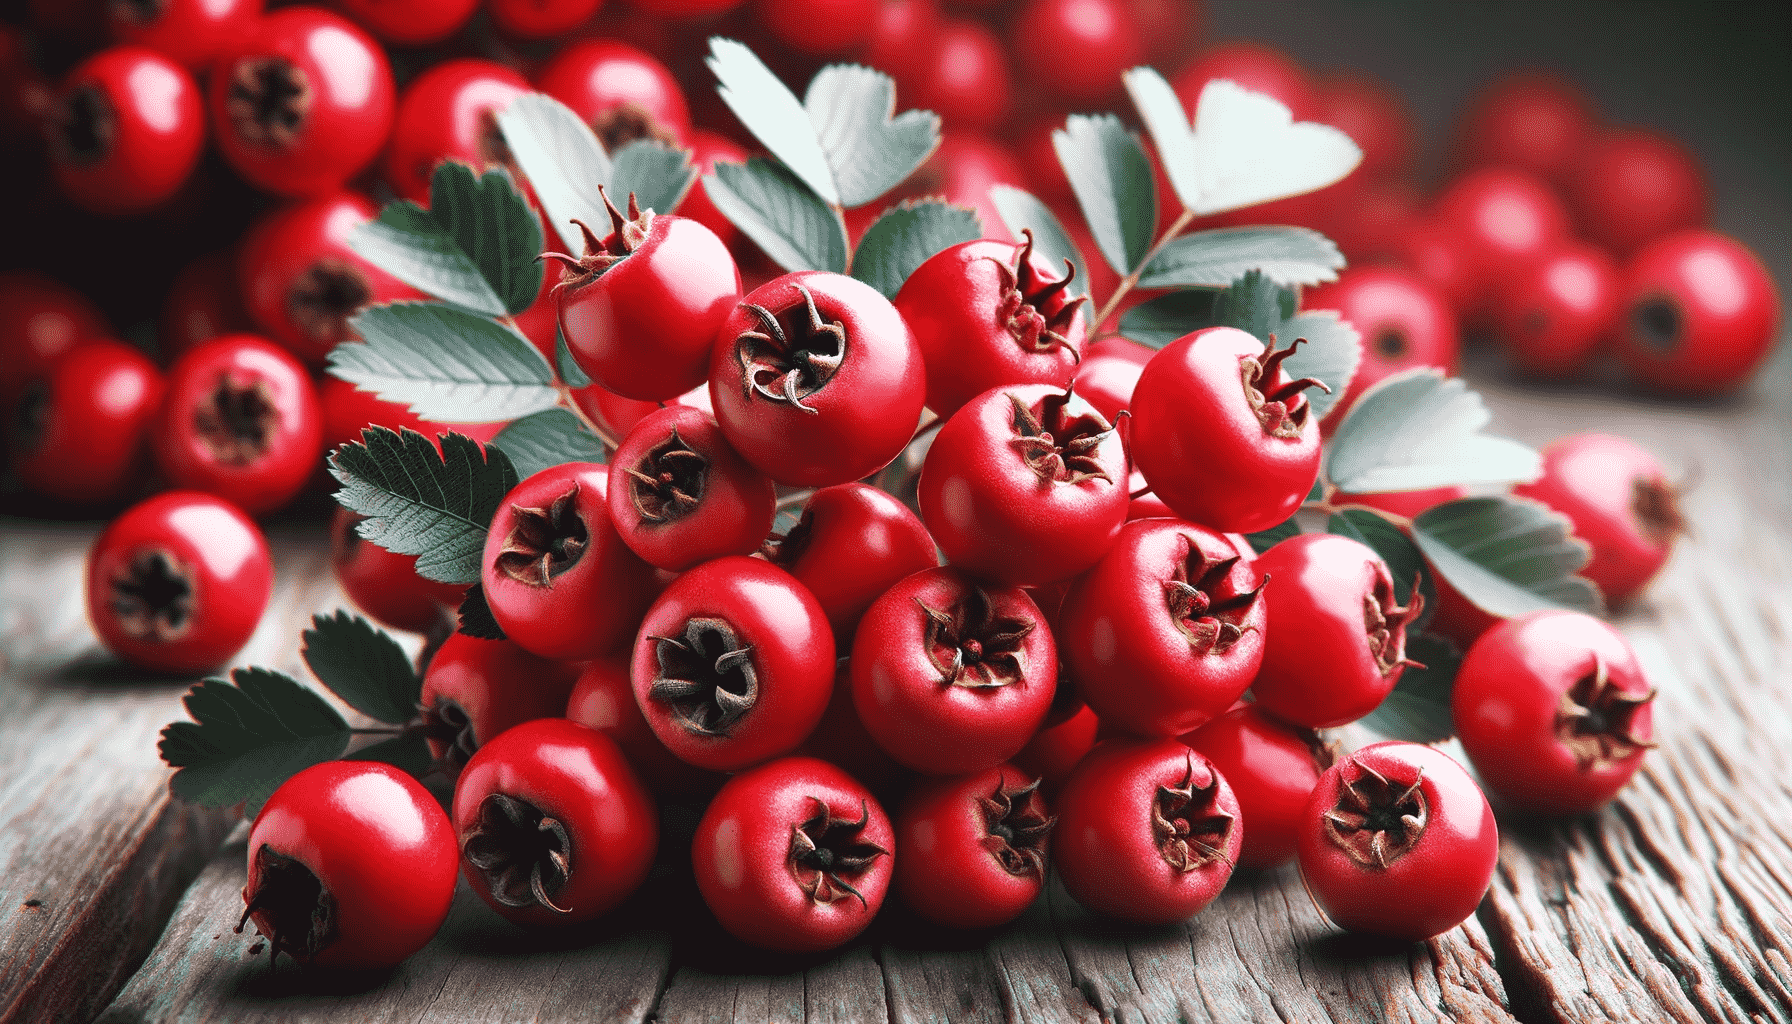 Hawthorn Berries The Superfood for Your Heart and Health